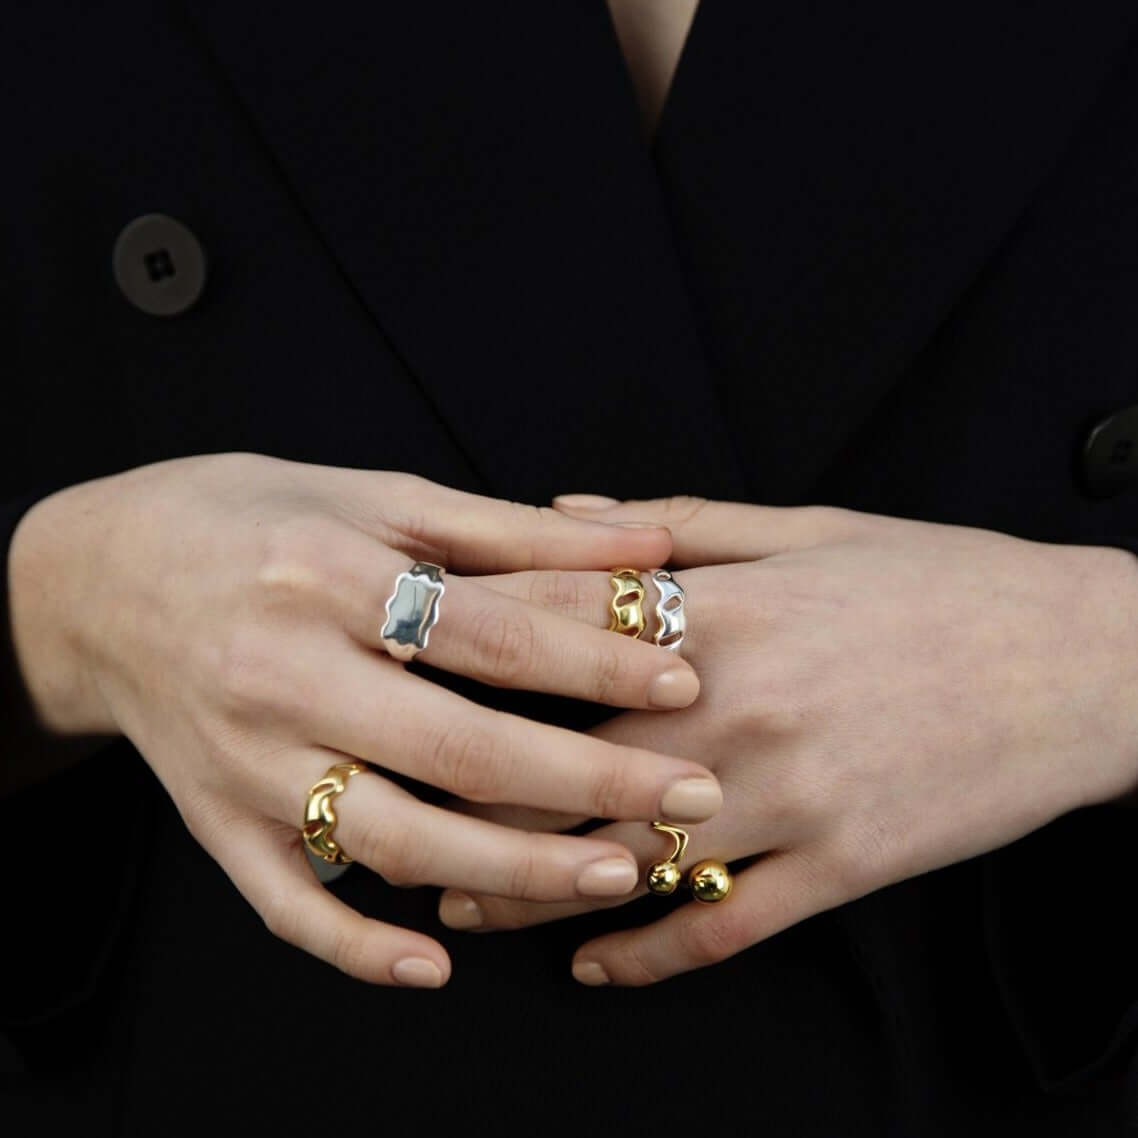 Female hands held together, wearings many rings